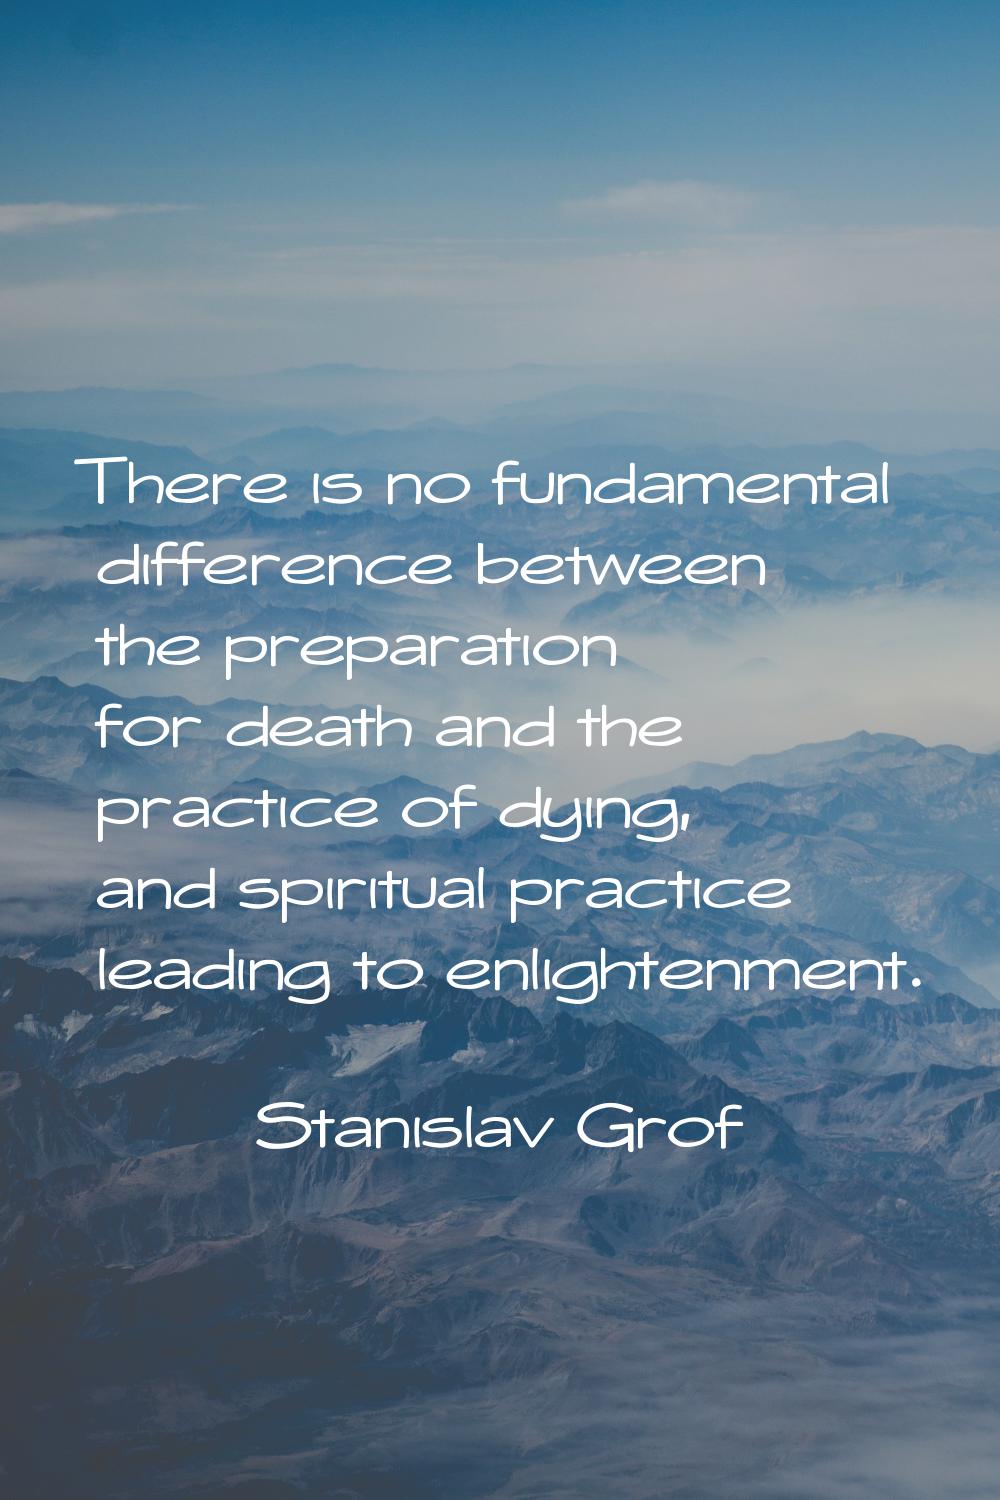 There is no fundamental difference between the preparation for death and the practice of dying, and